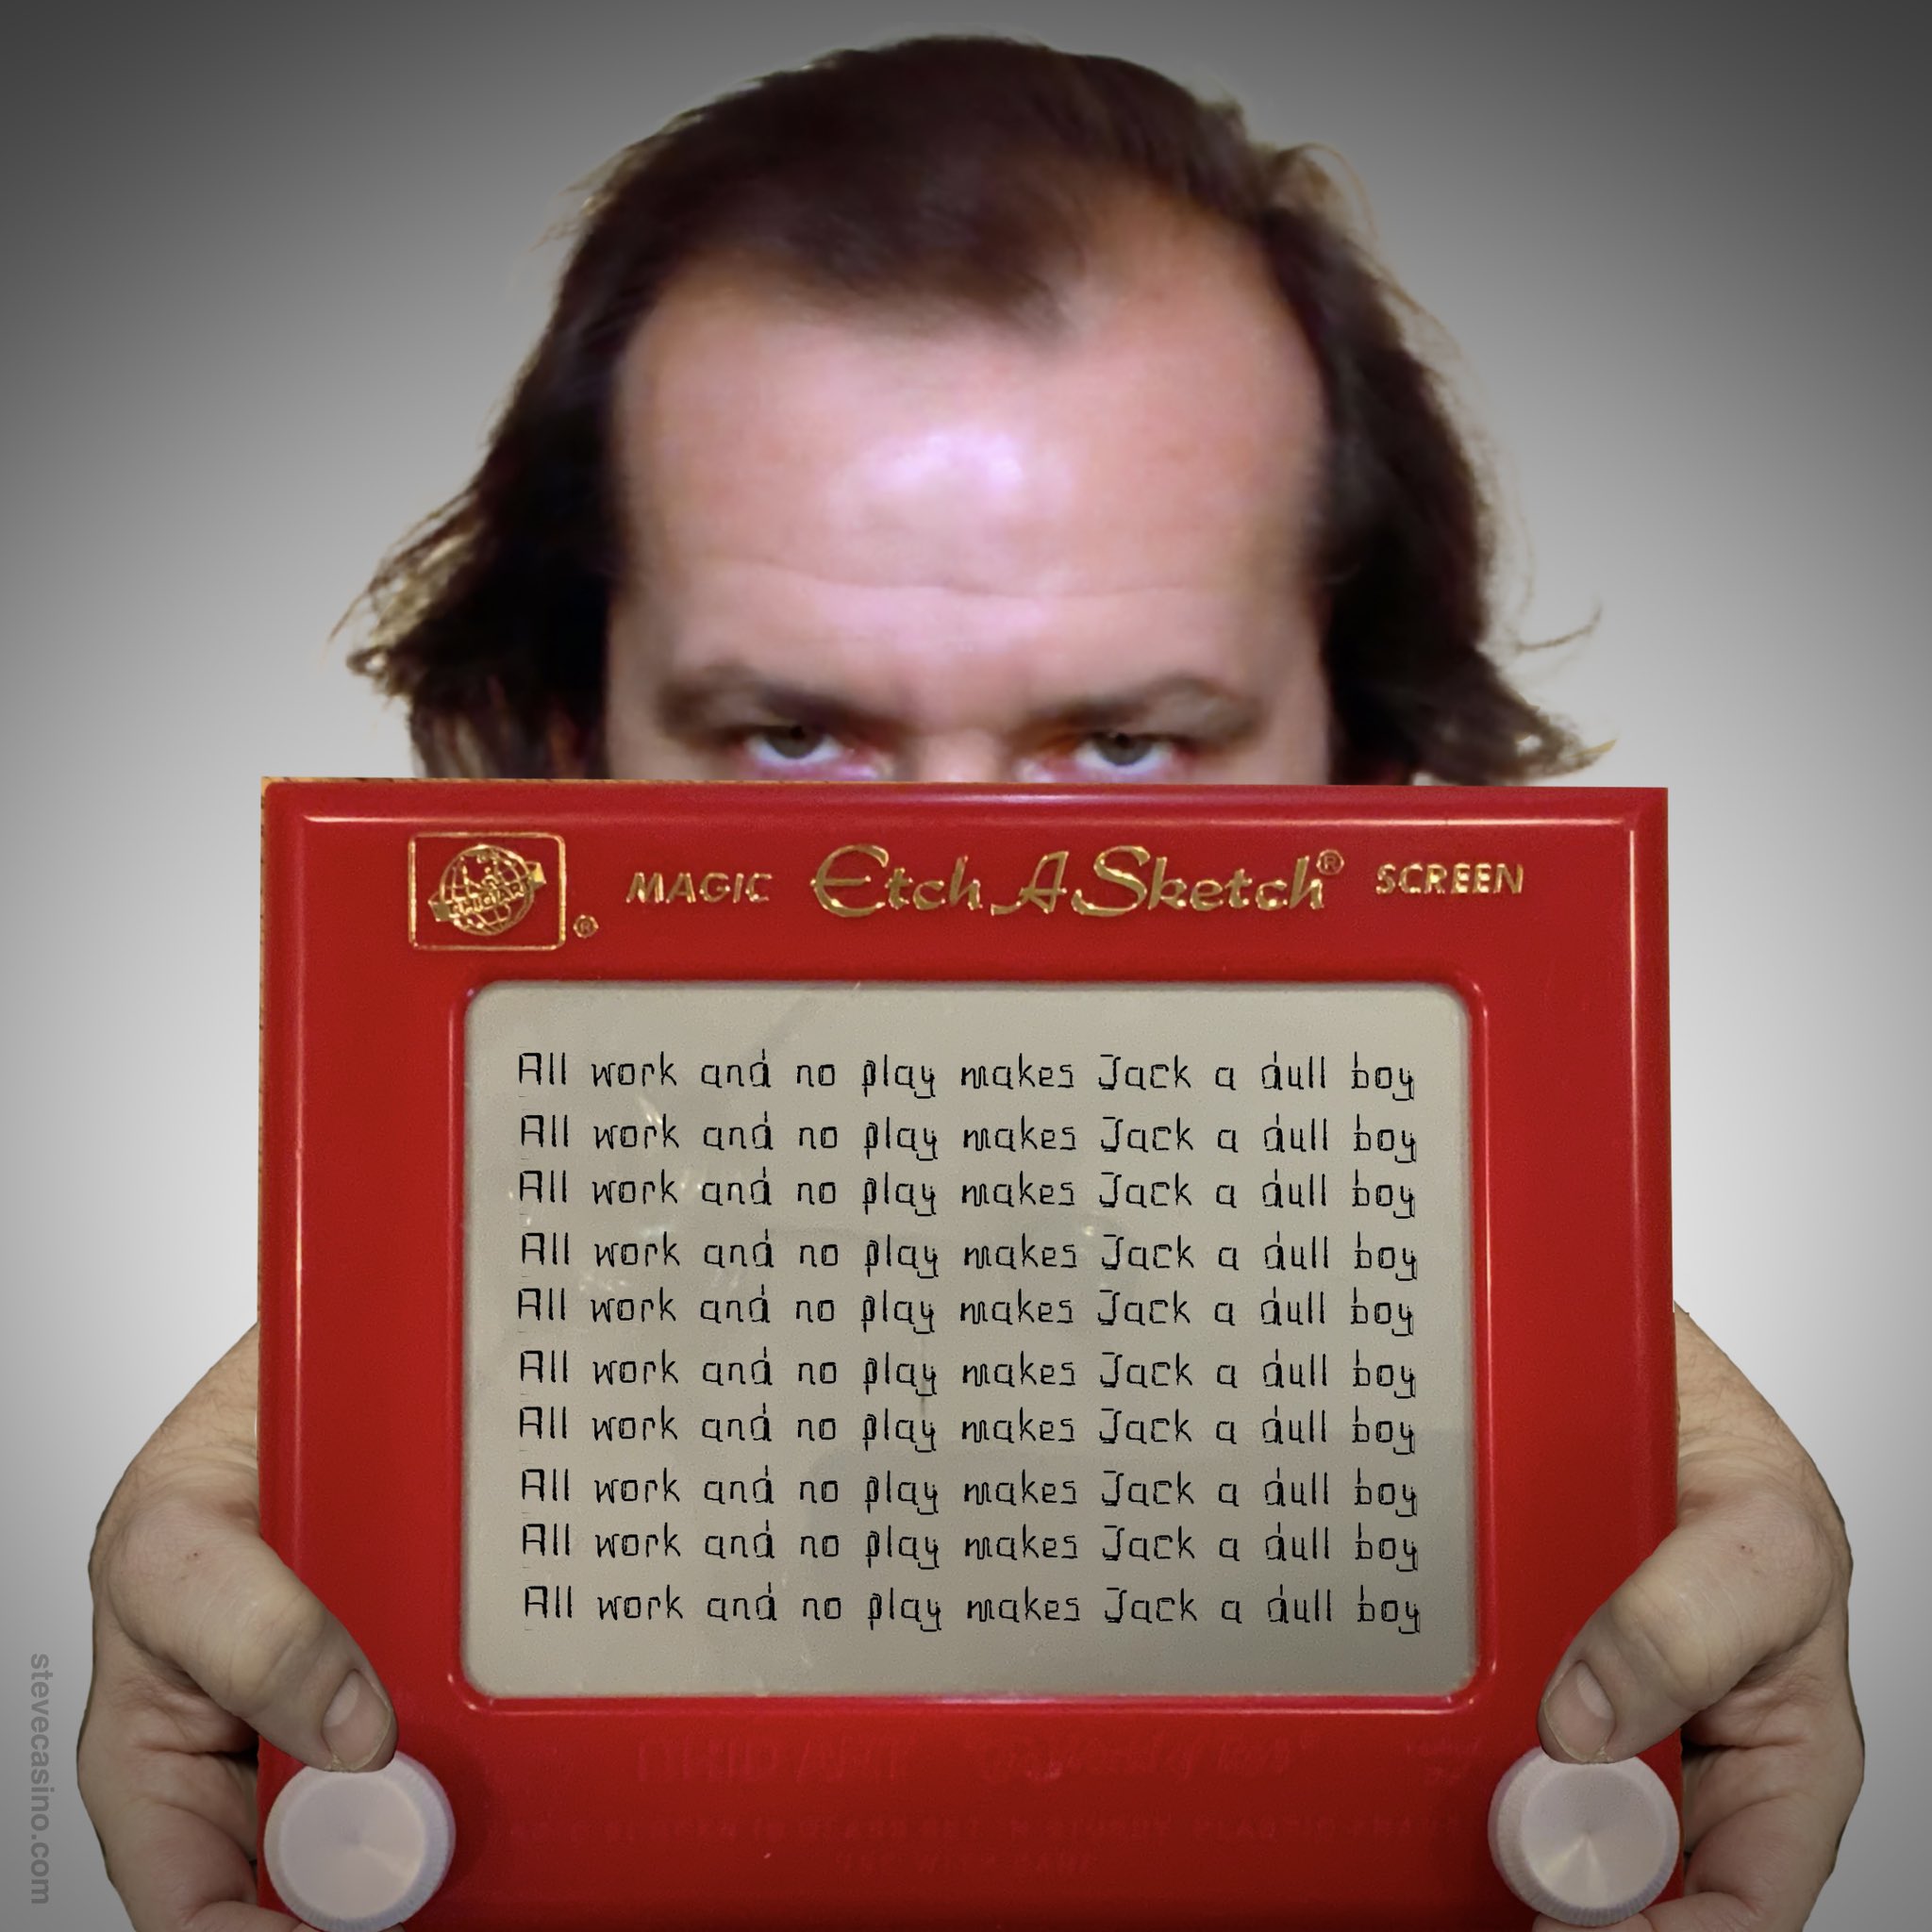 Steve Casino on X: Sometimes I come up with silly ideas that have nothing  to do with anything but I can't rest until I see them visualized. # etchasketch #theshining  / X